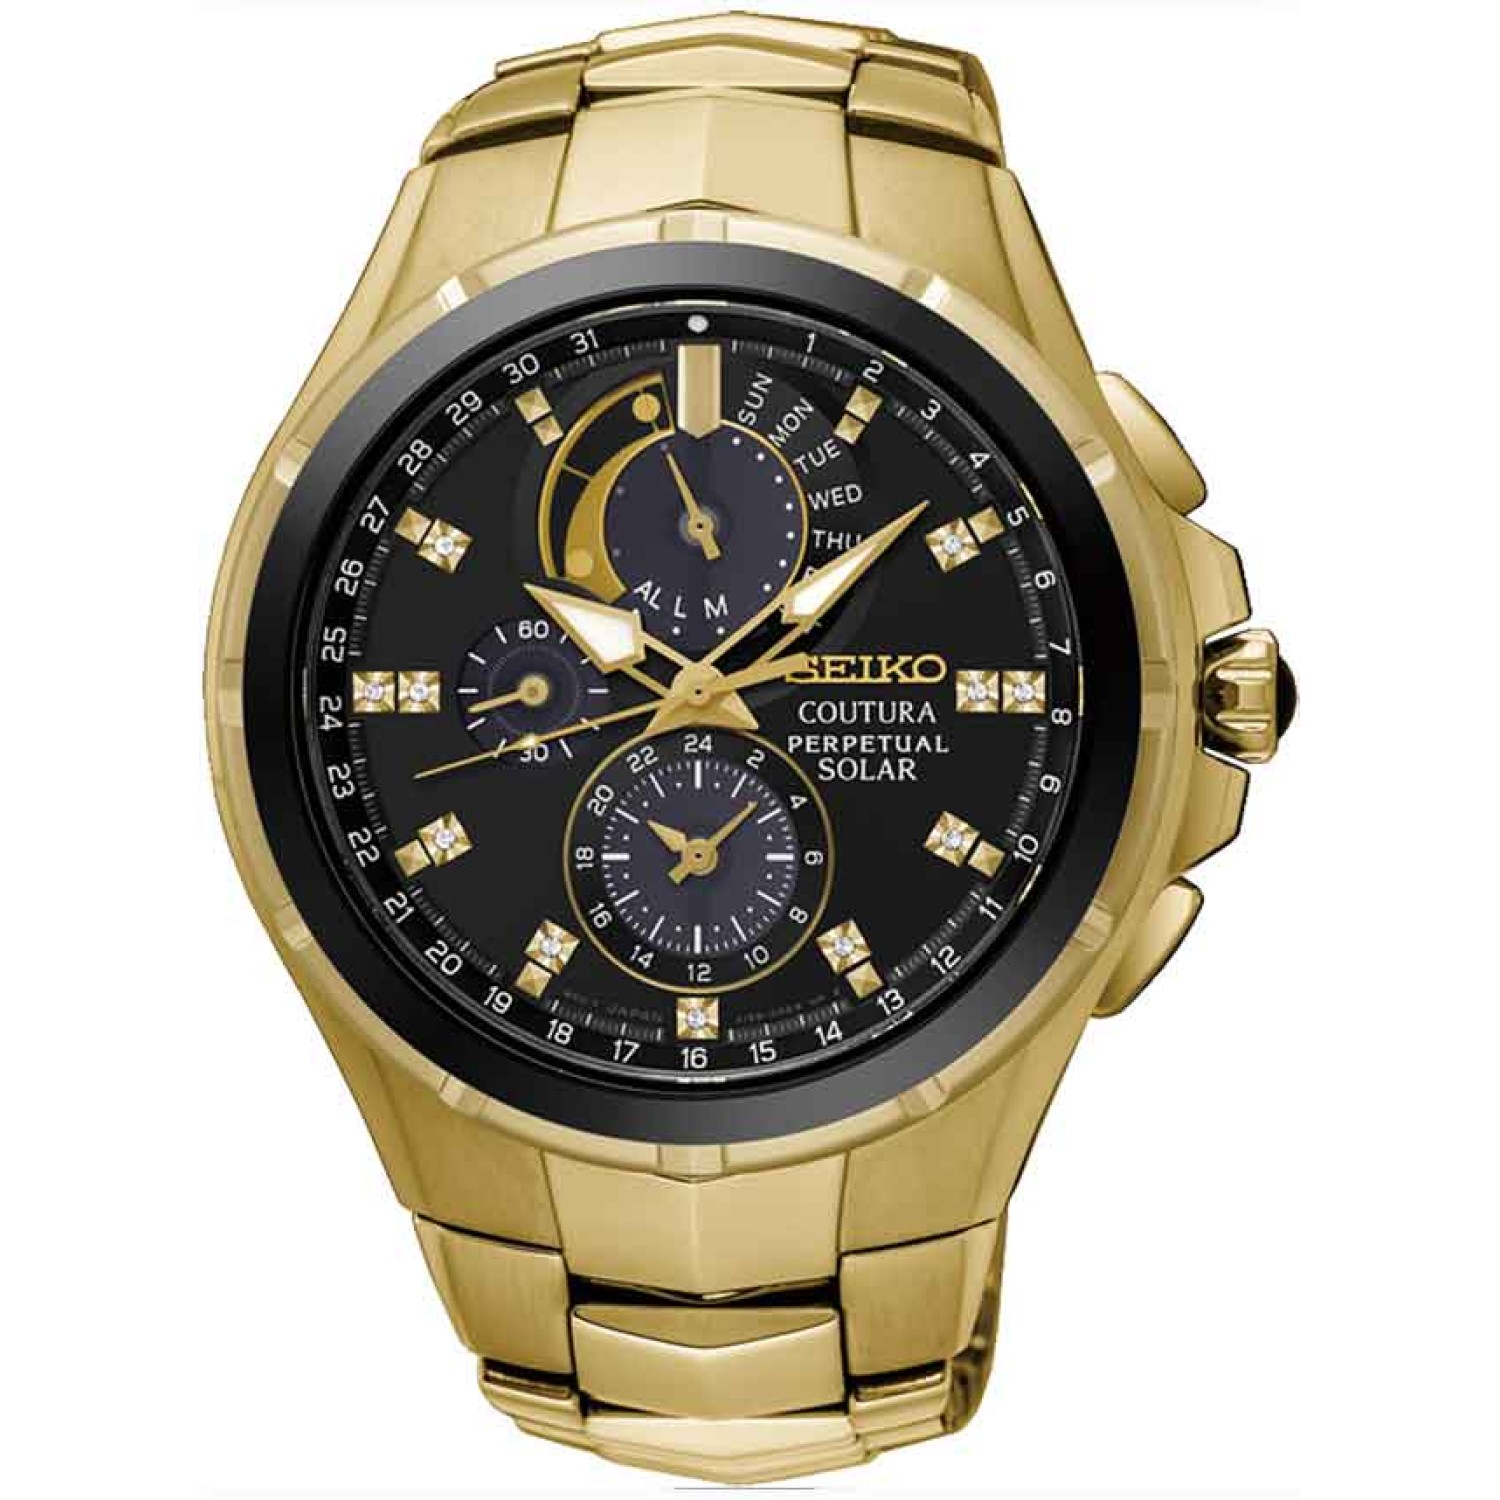 SSC572P Seiko Coutura Perpetual Solar Chronograph Watch. SSC572P Seiko Coutura Perpetual Solar Chronograph Diamond set Watch is now available at Christies Papatoetoe or online3 Months No Payments and Interest for Q Card holders 3 Year Guarantee Power Rese